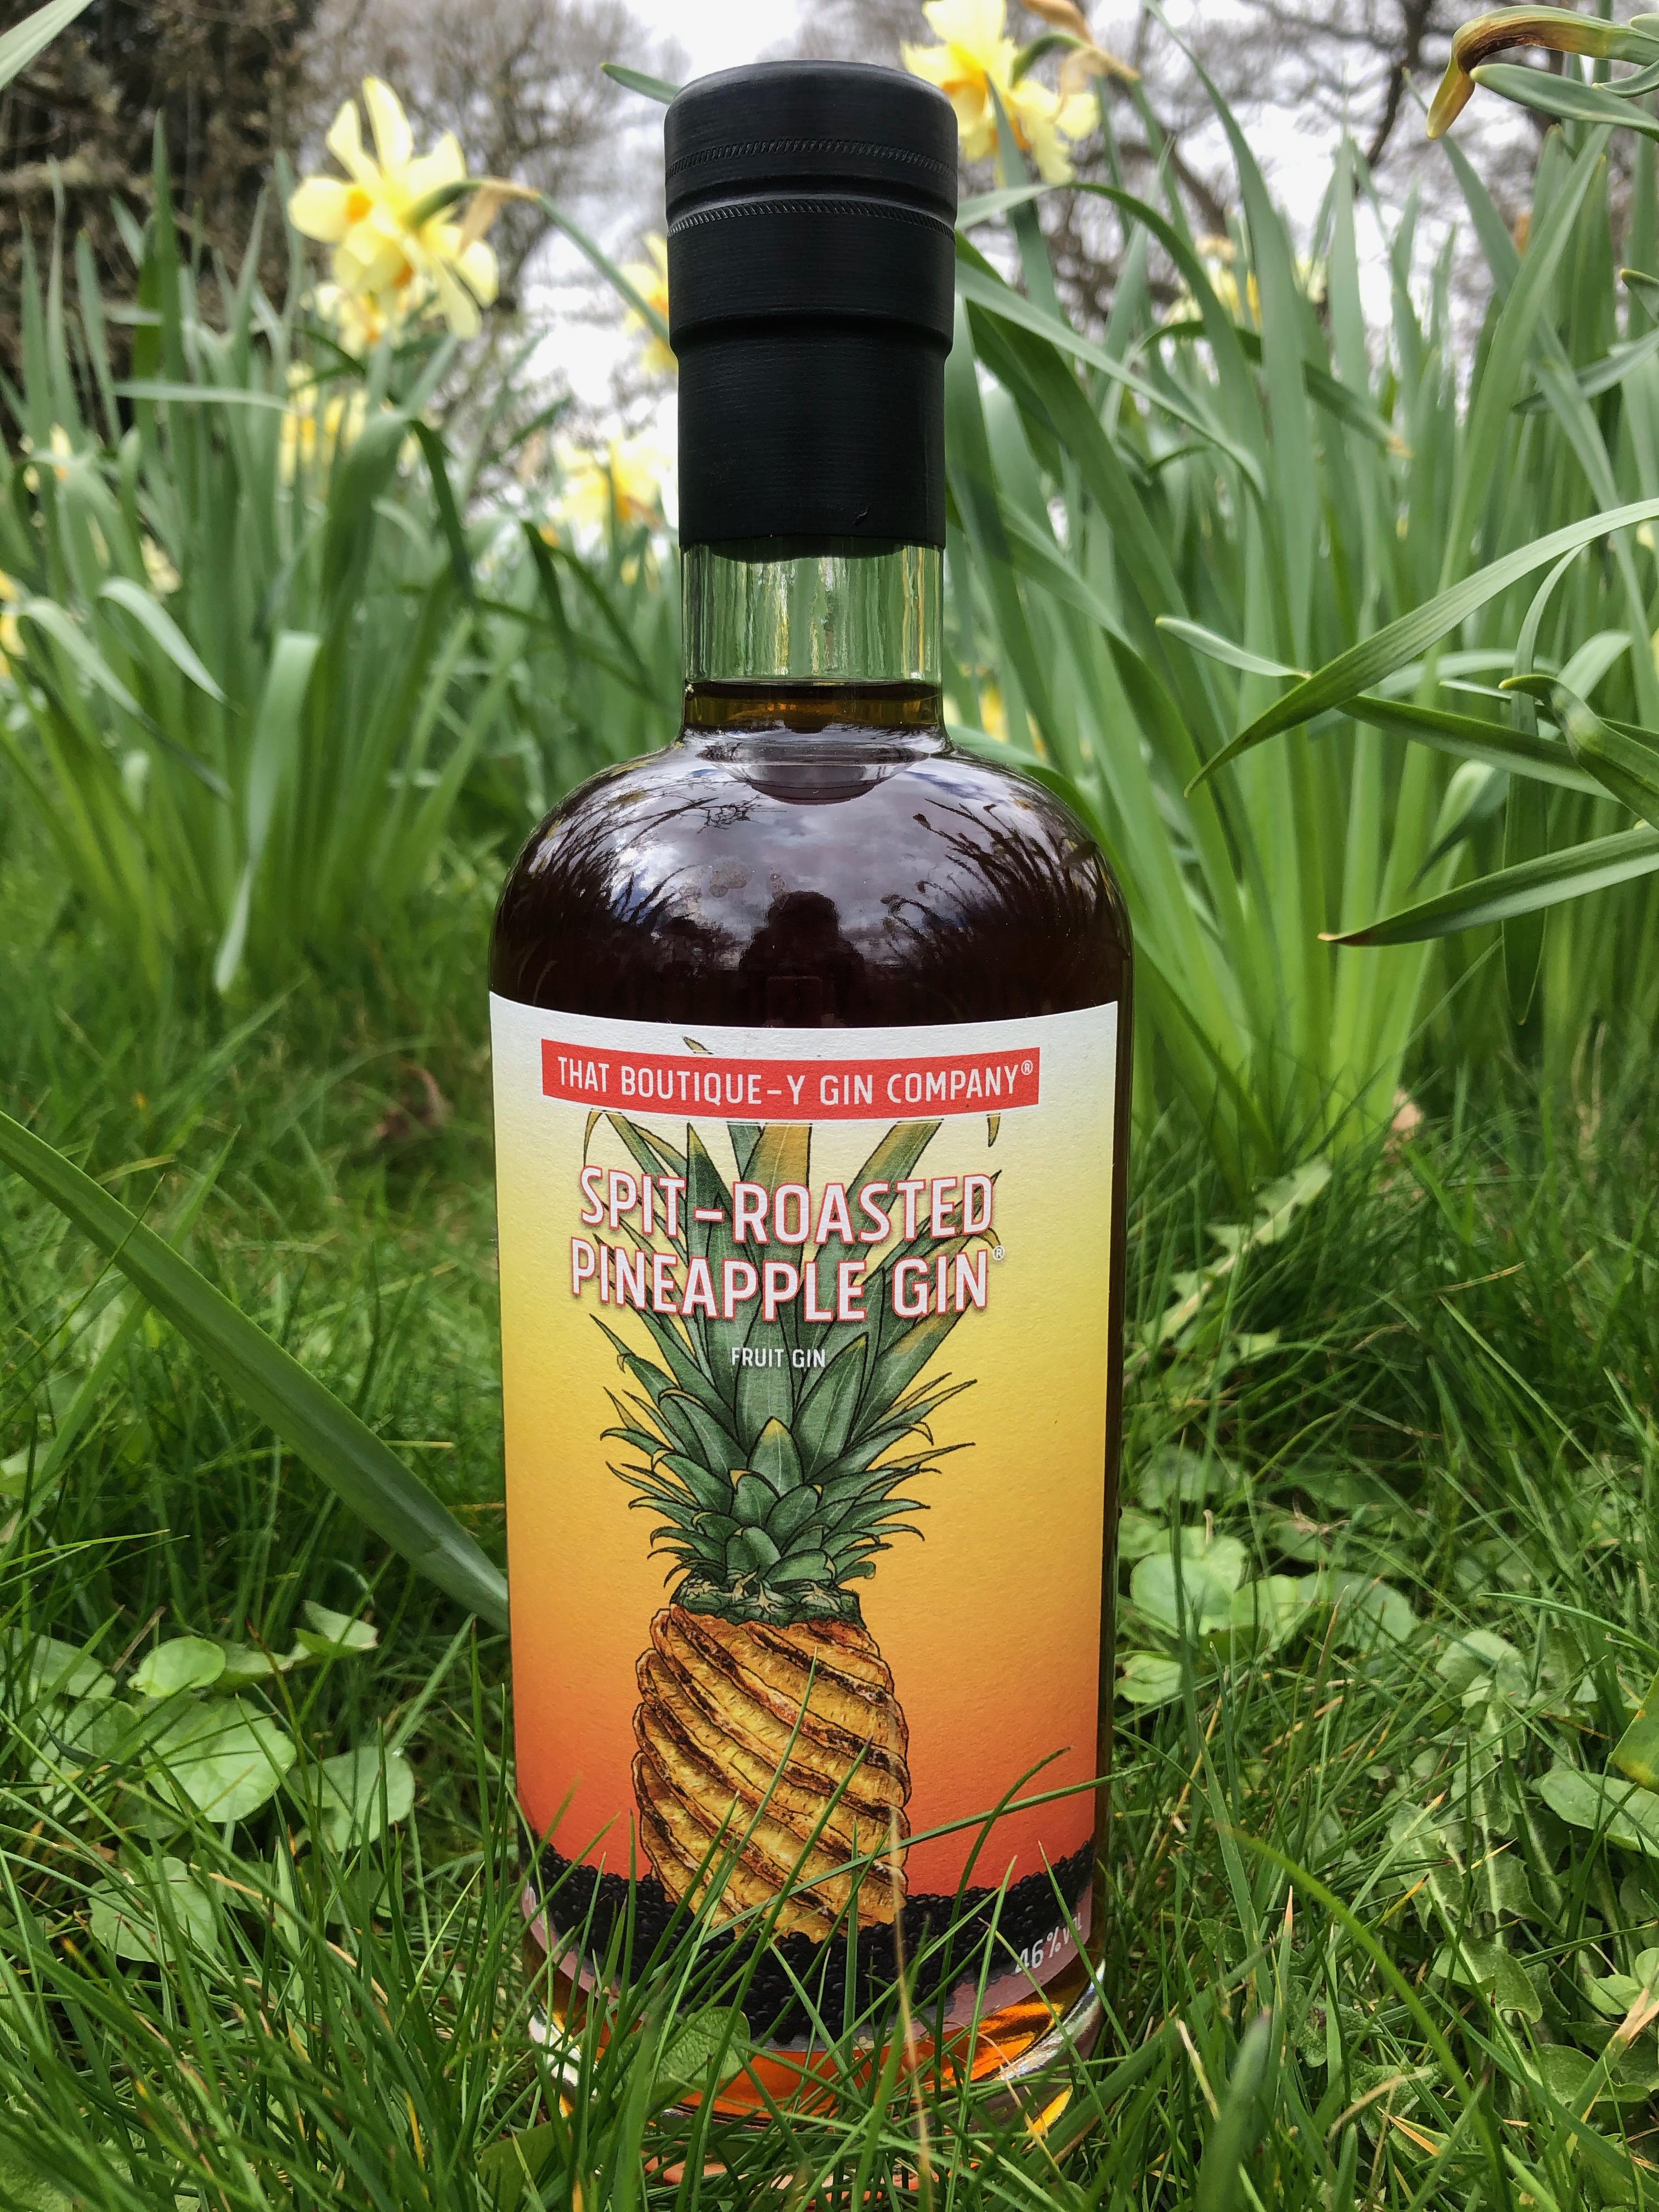 That Boutique-y Gin Company: Spit- Roasted Pineapple Gin